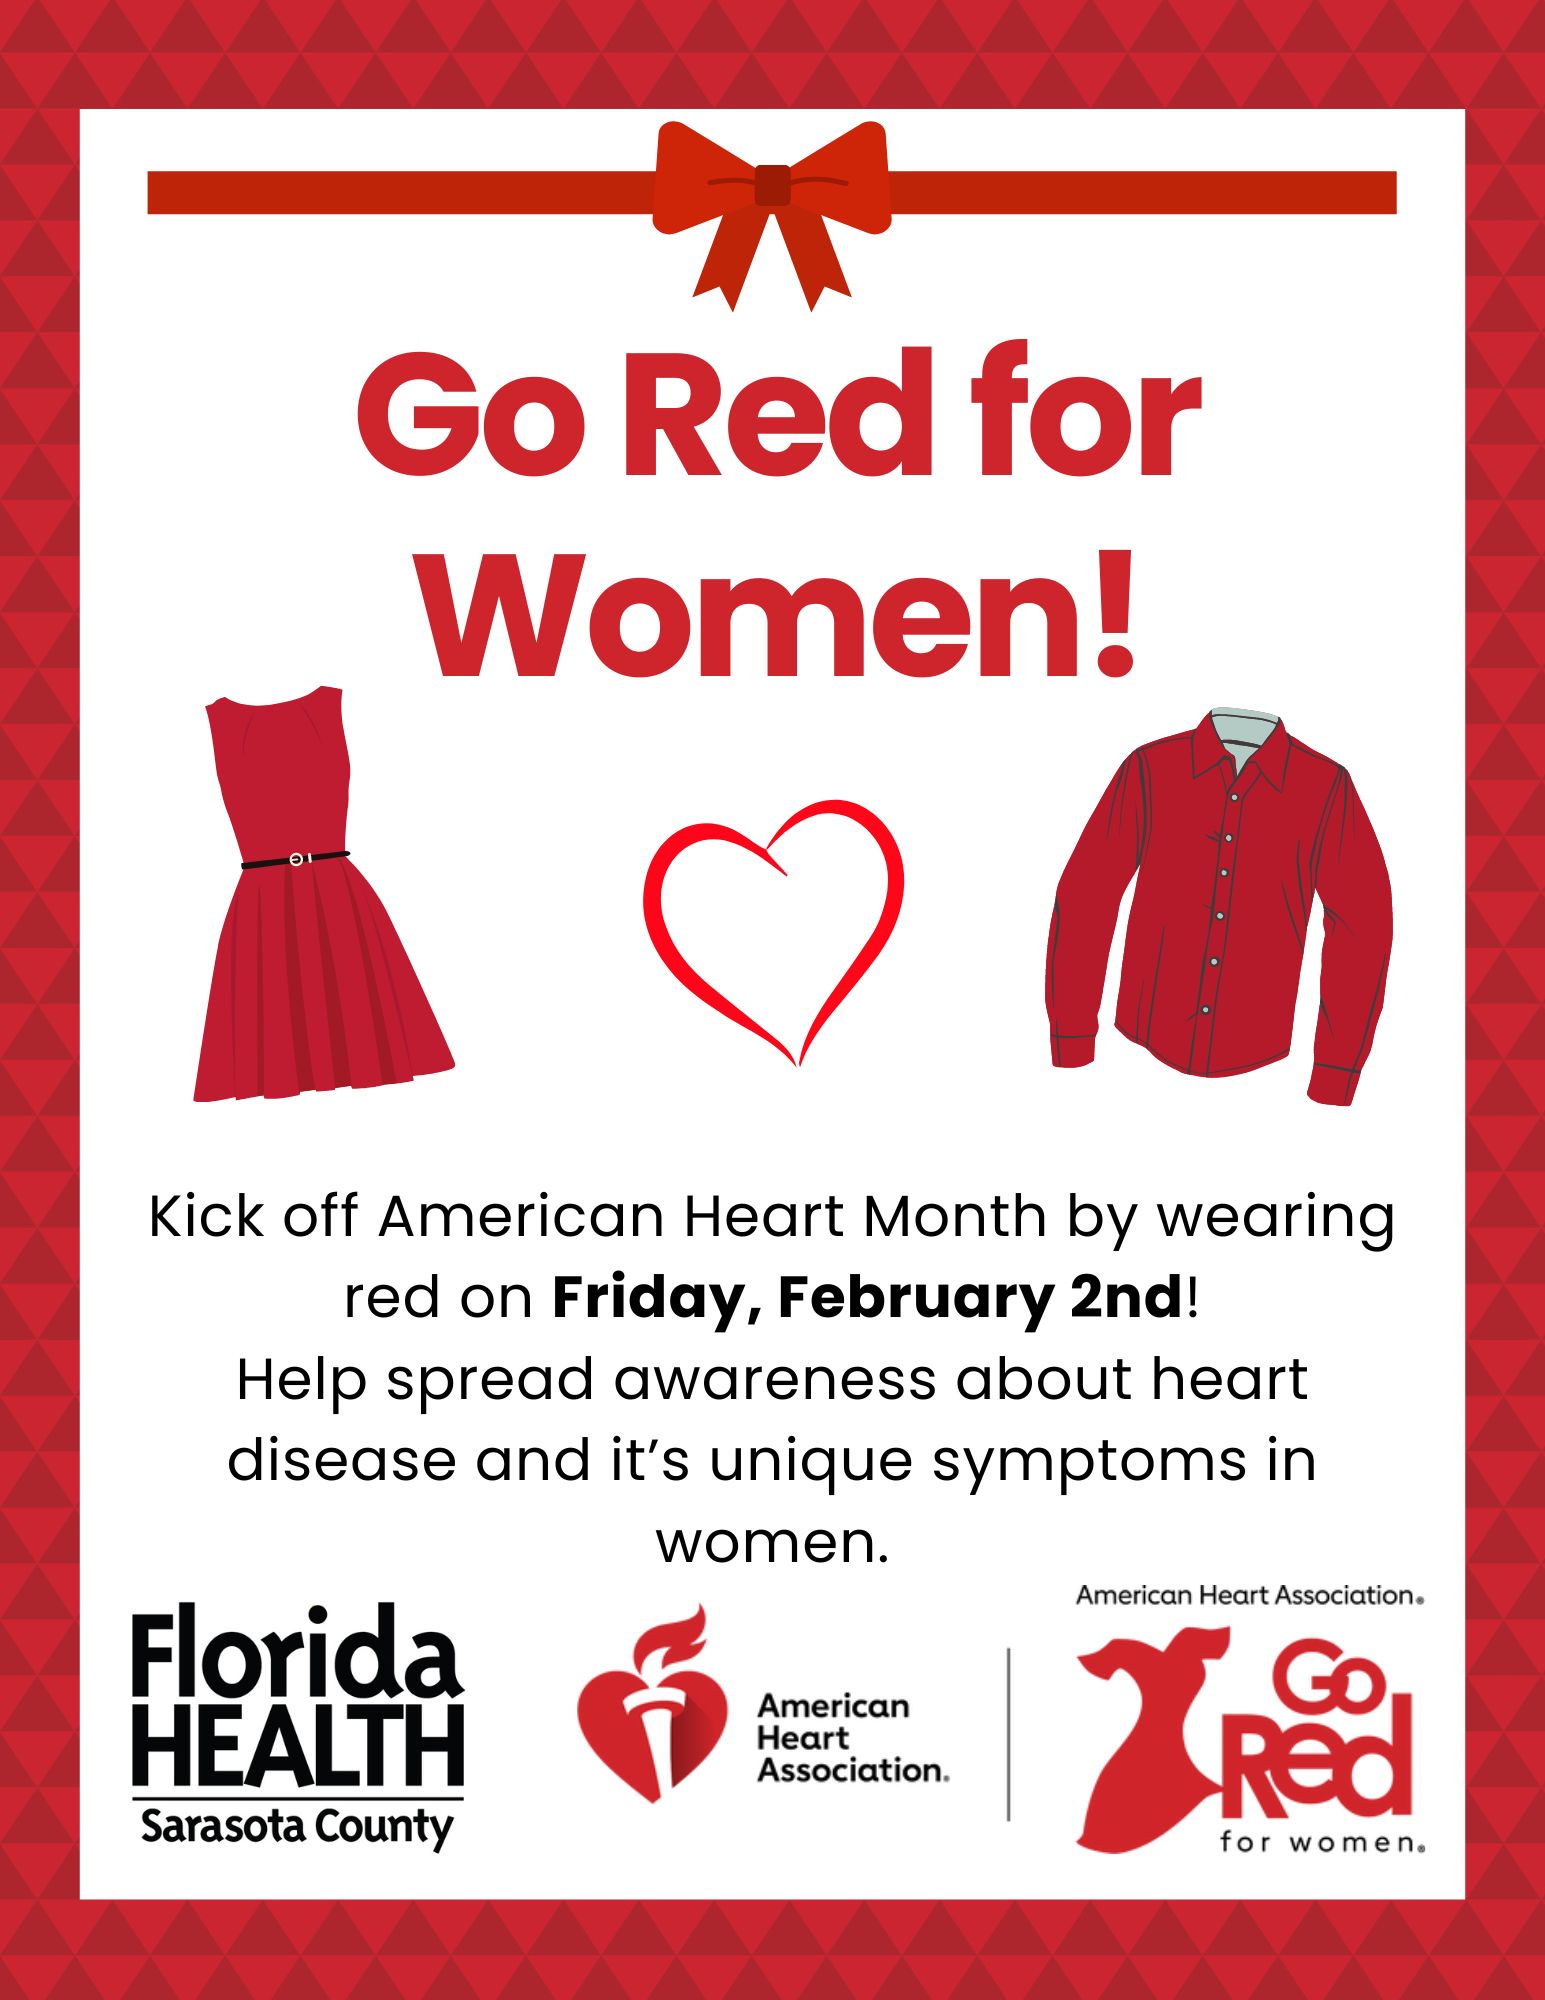 Go Red for Women  Florida Department of Health in Sarasota